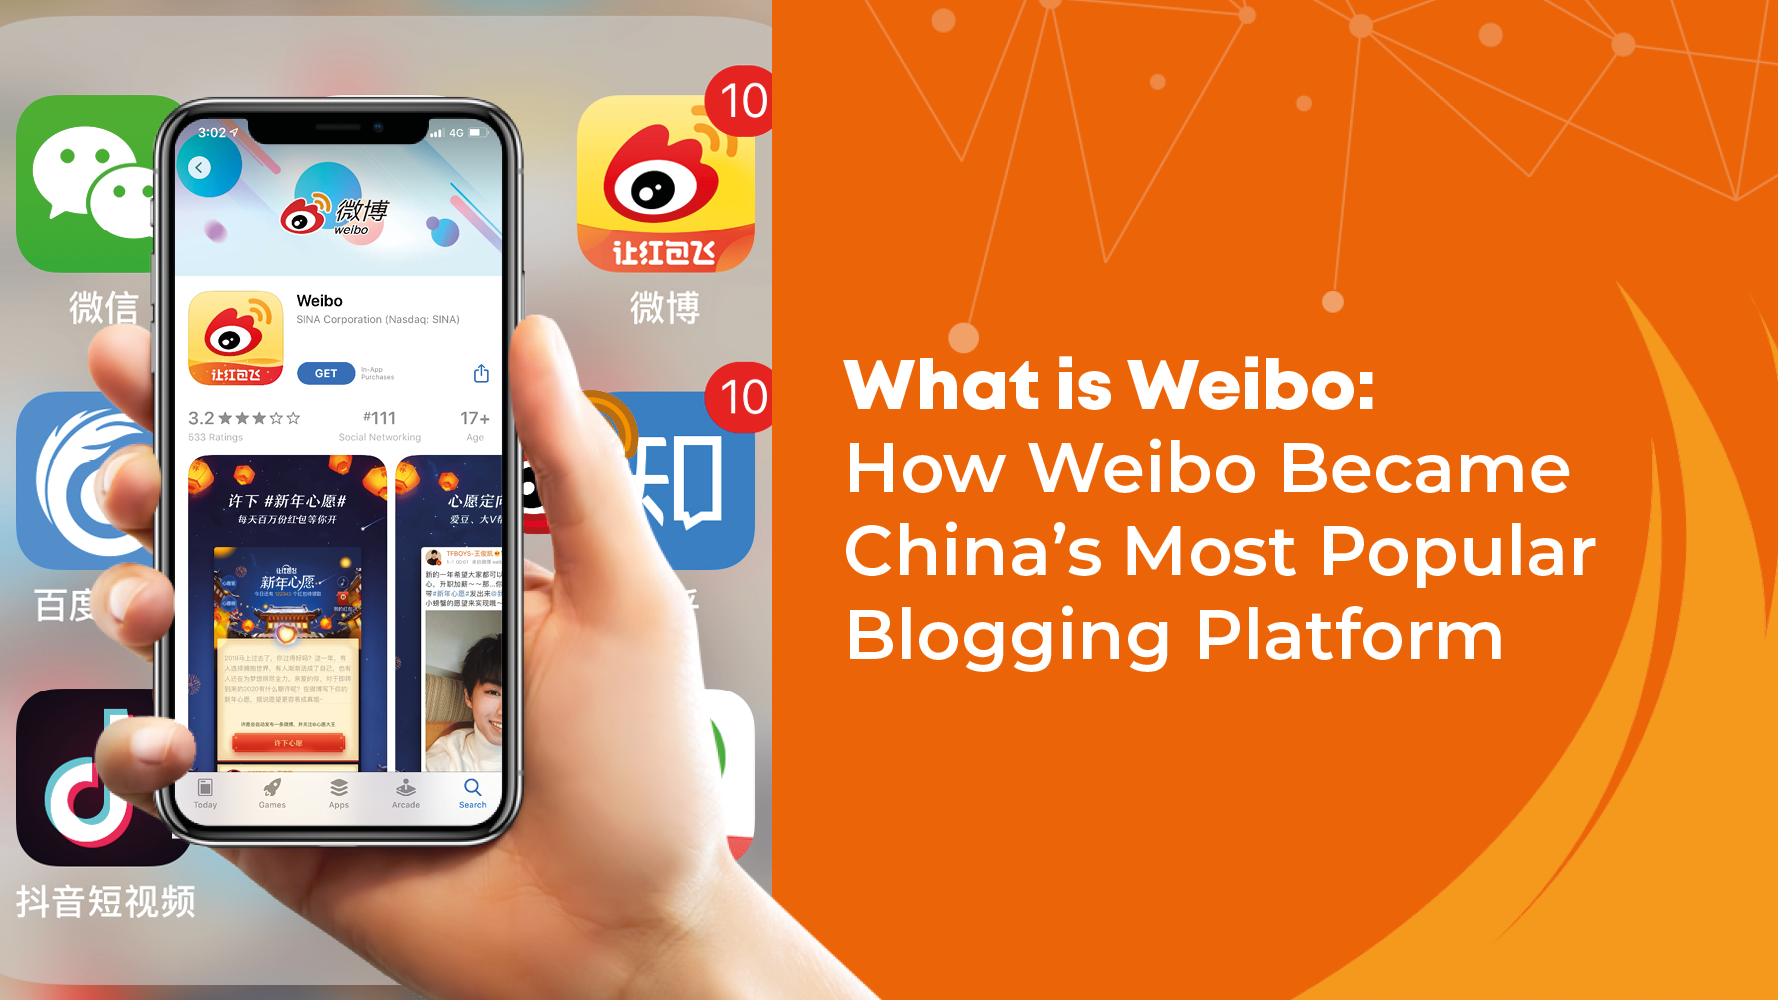 What is Weibo: How Weibo Became China’s Most Popular Blogging Platform